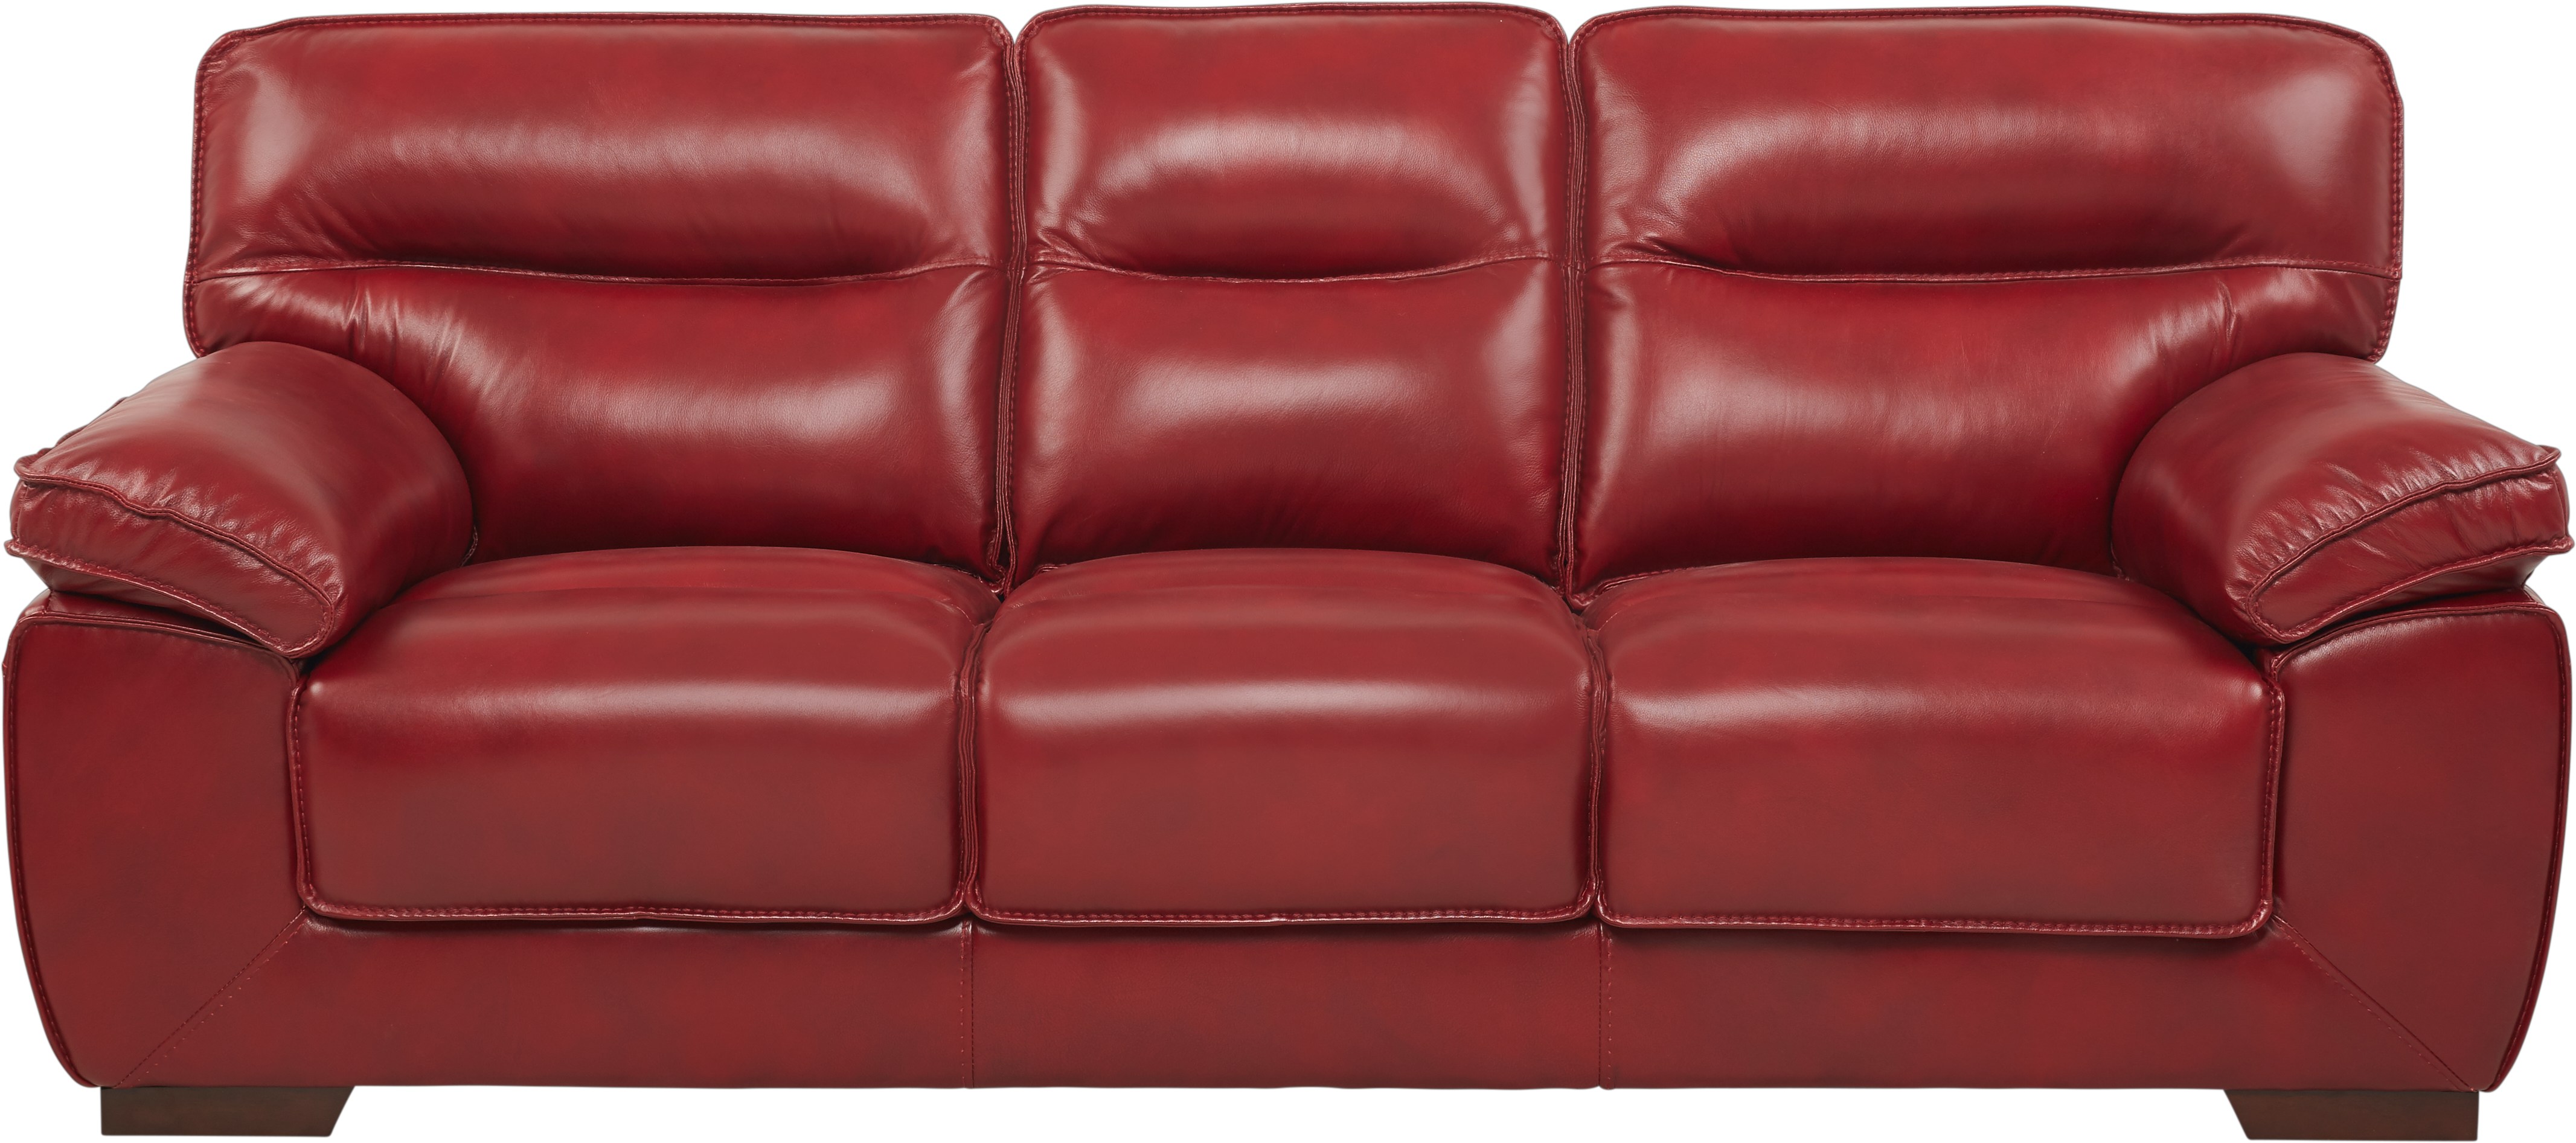 directional sofa leather red